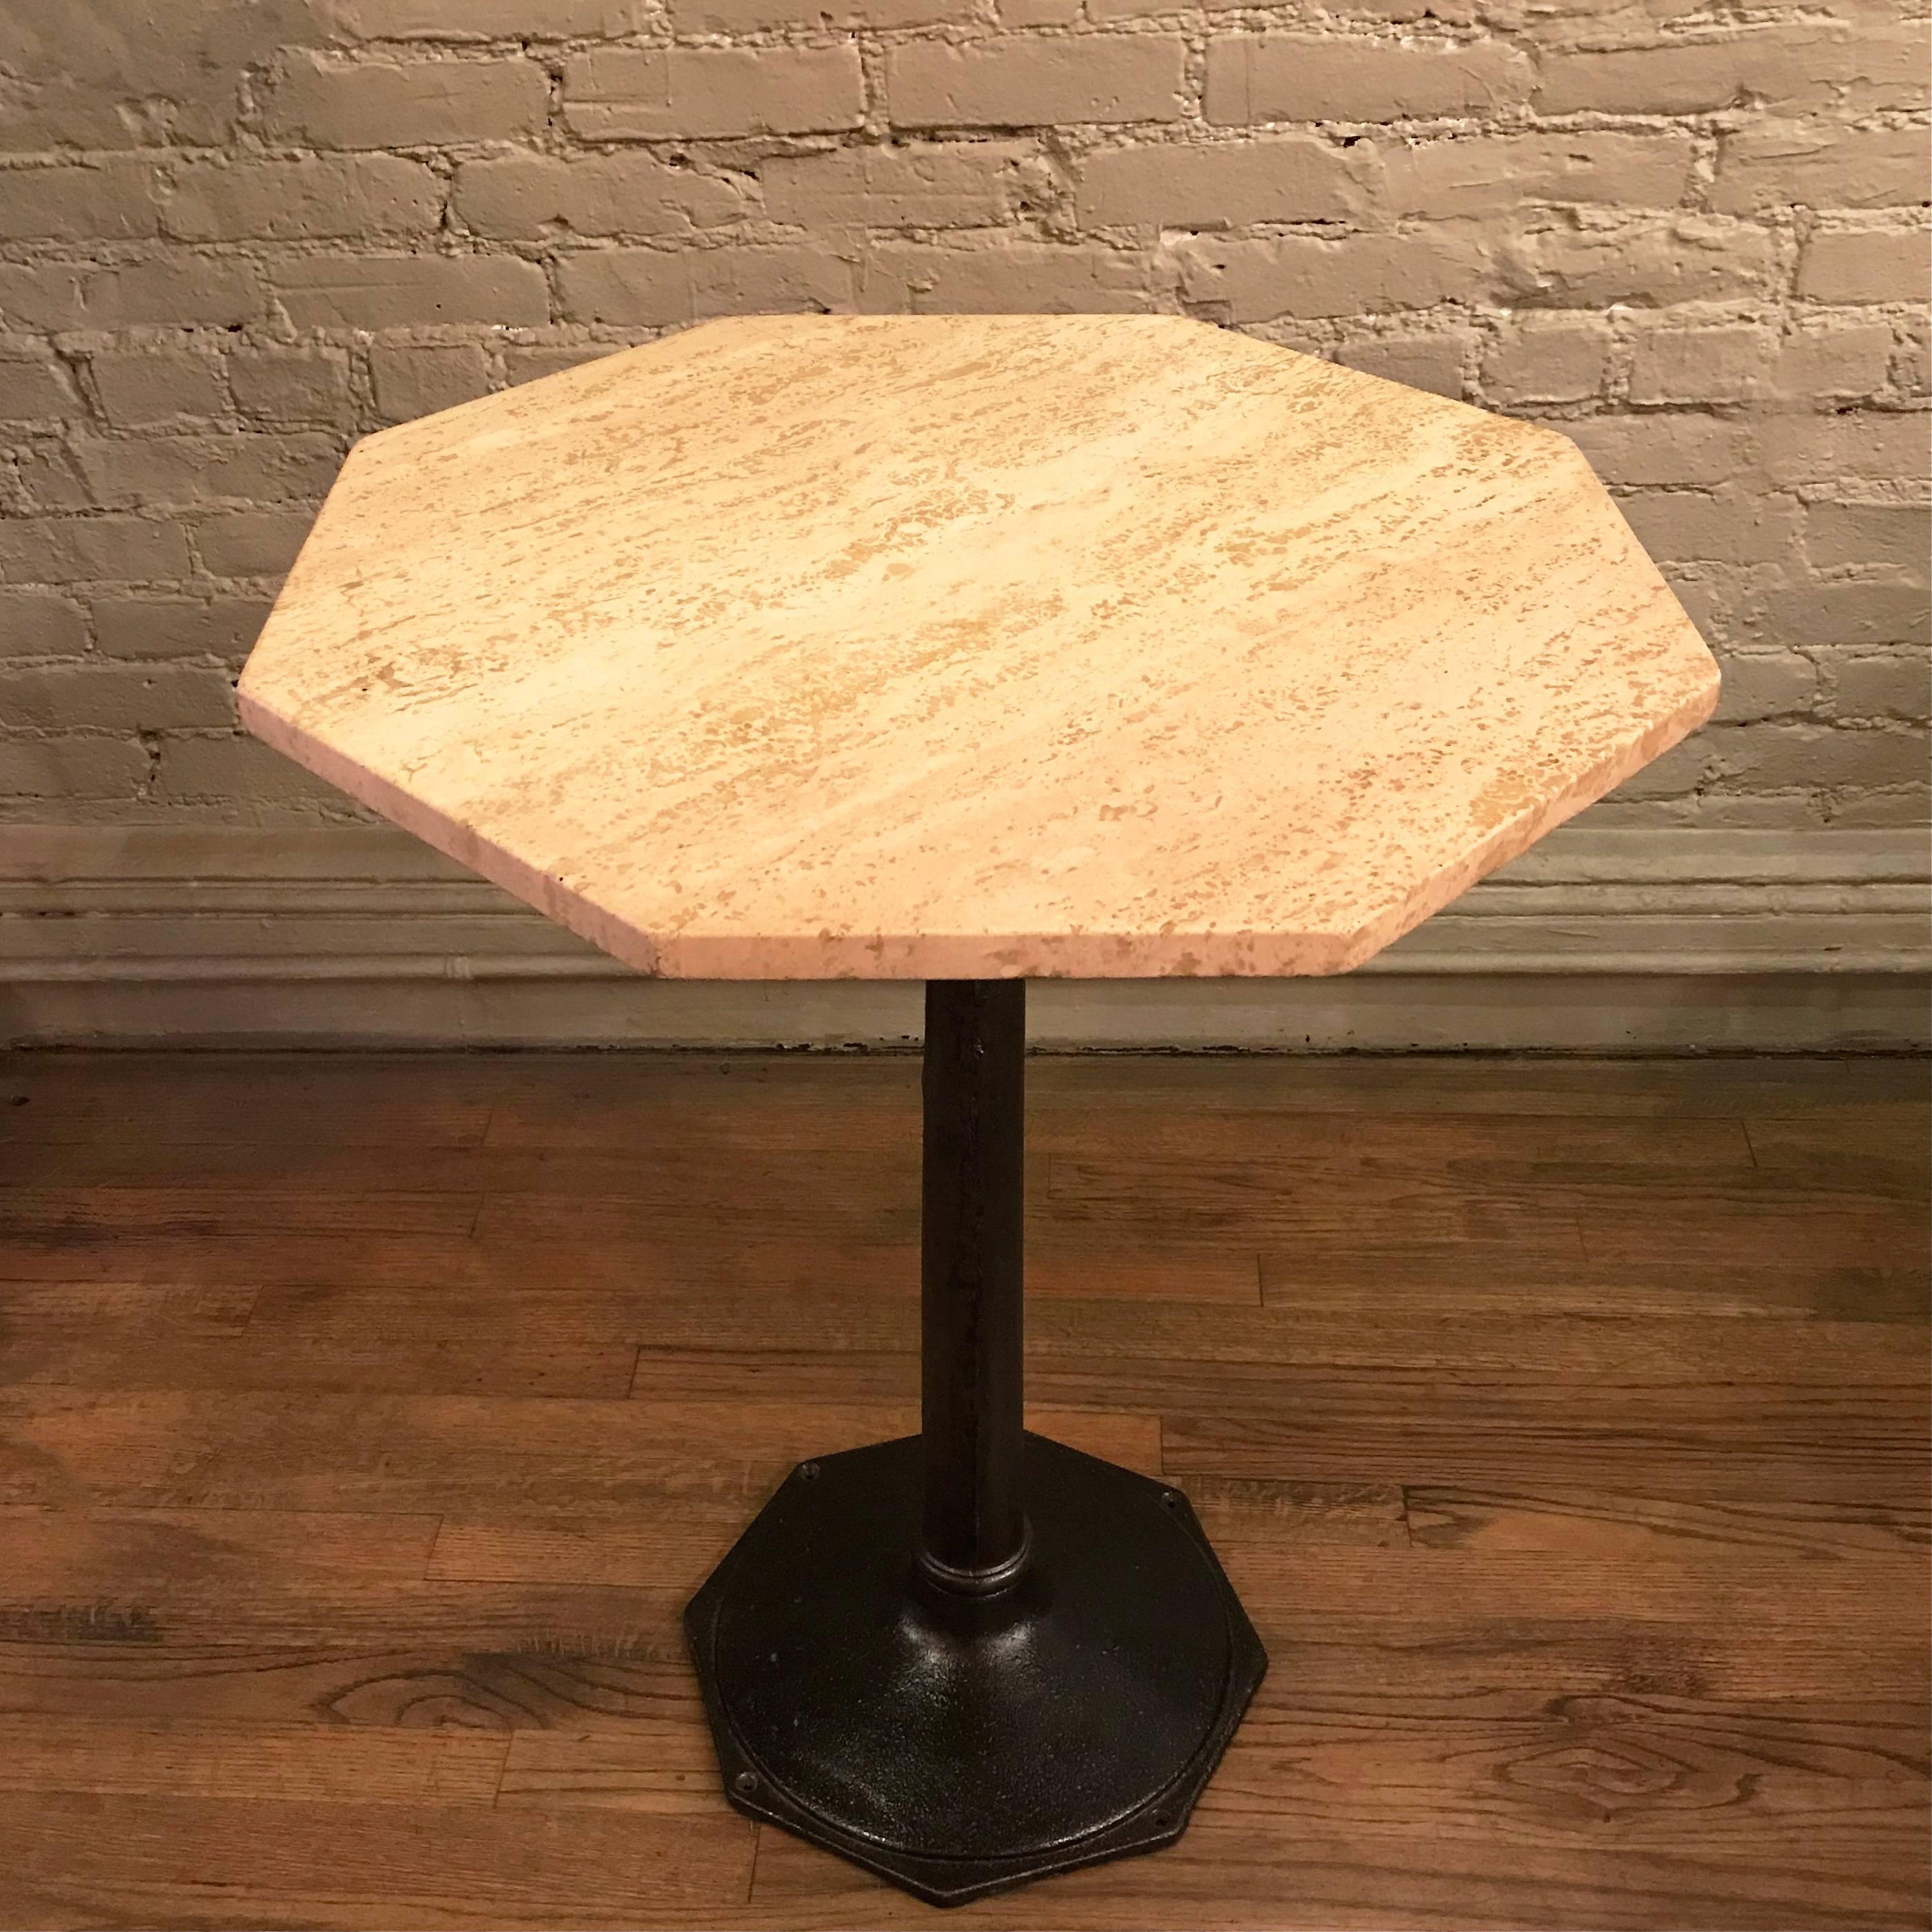 Bistro, café, dining table features a 1930s, cast iron octagonal pedestal base paired with an octagonal, travertine stone top.